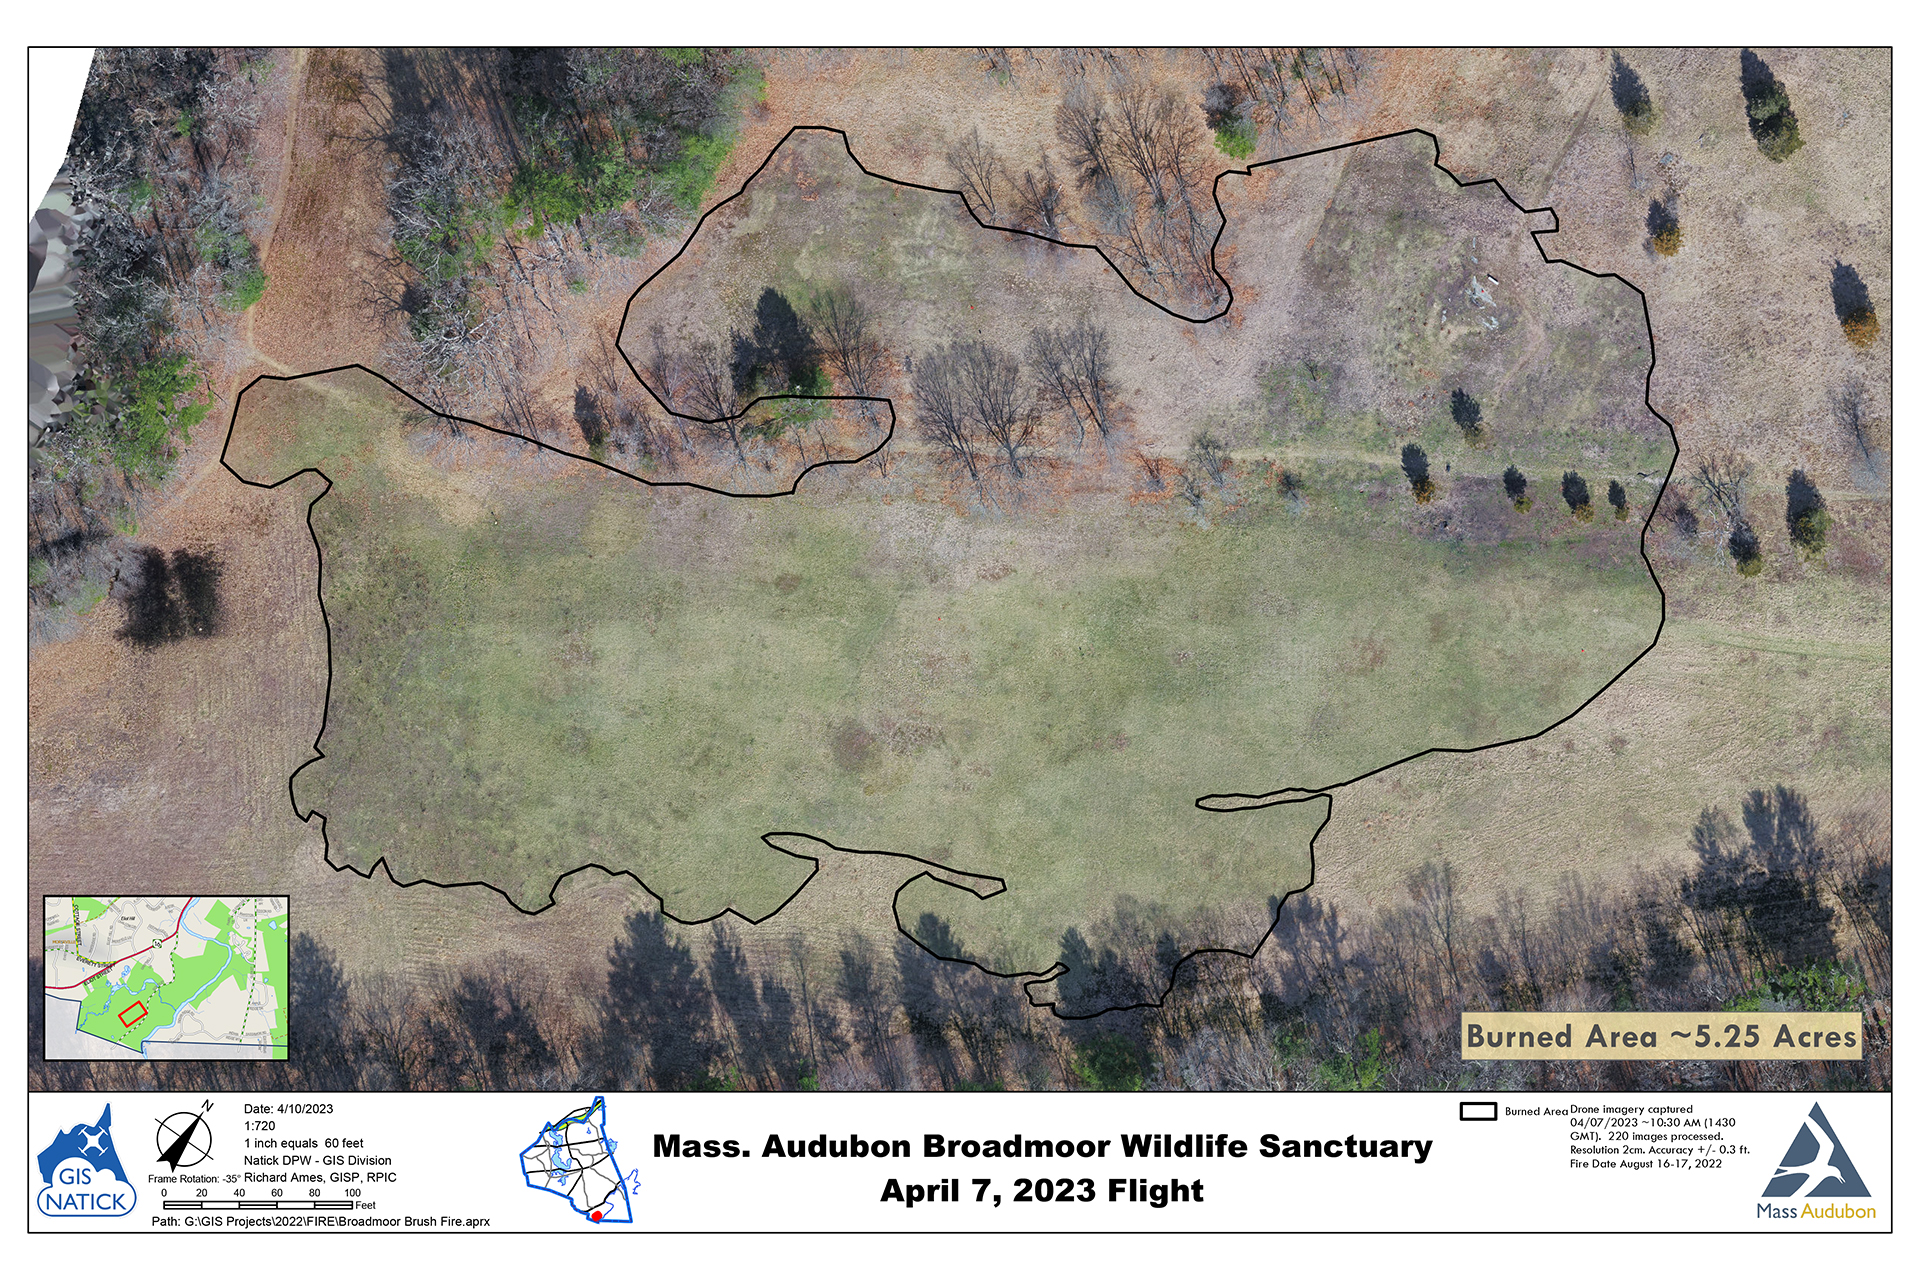 Aerial view of Broadmoor showing brush fire recovery, a budding field of pale new grass, as of April 7, 2023